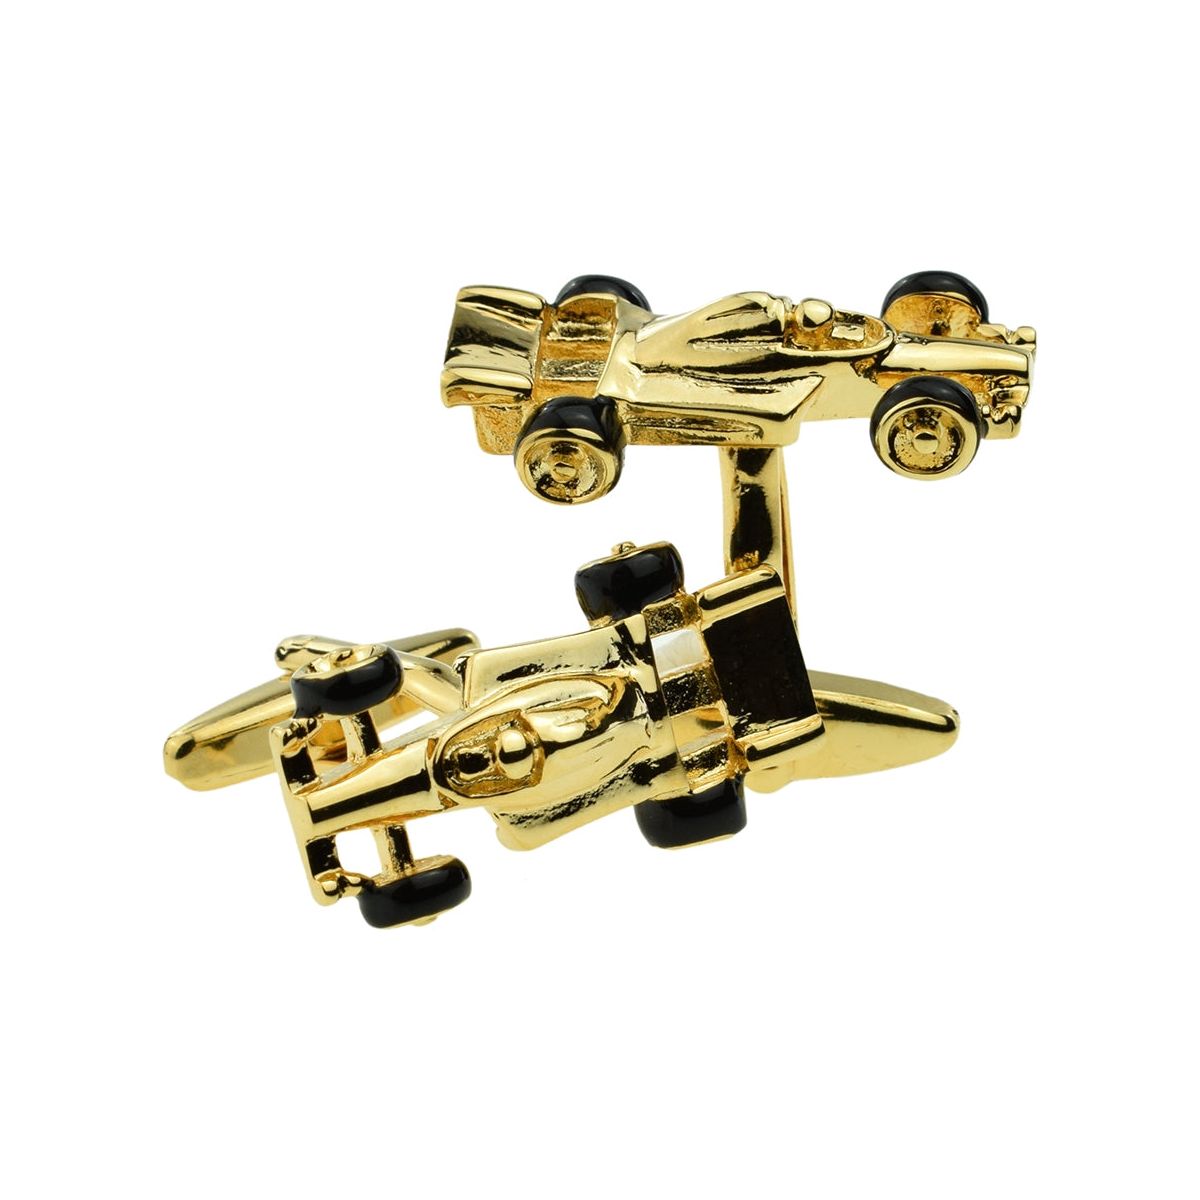 Gold Plated Racing Car Cufflinks - Ashton and Finch